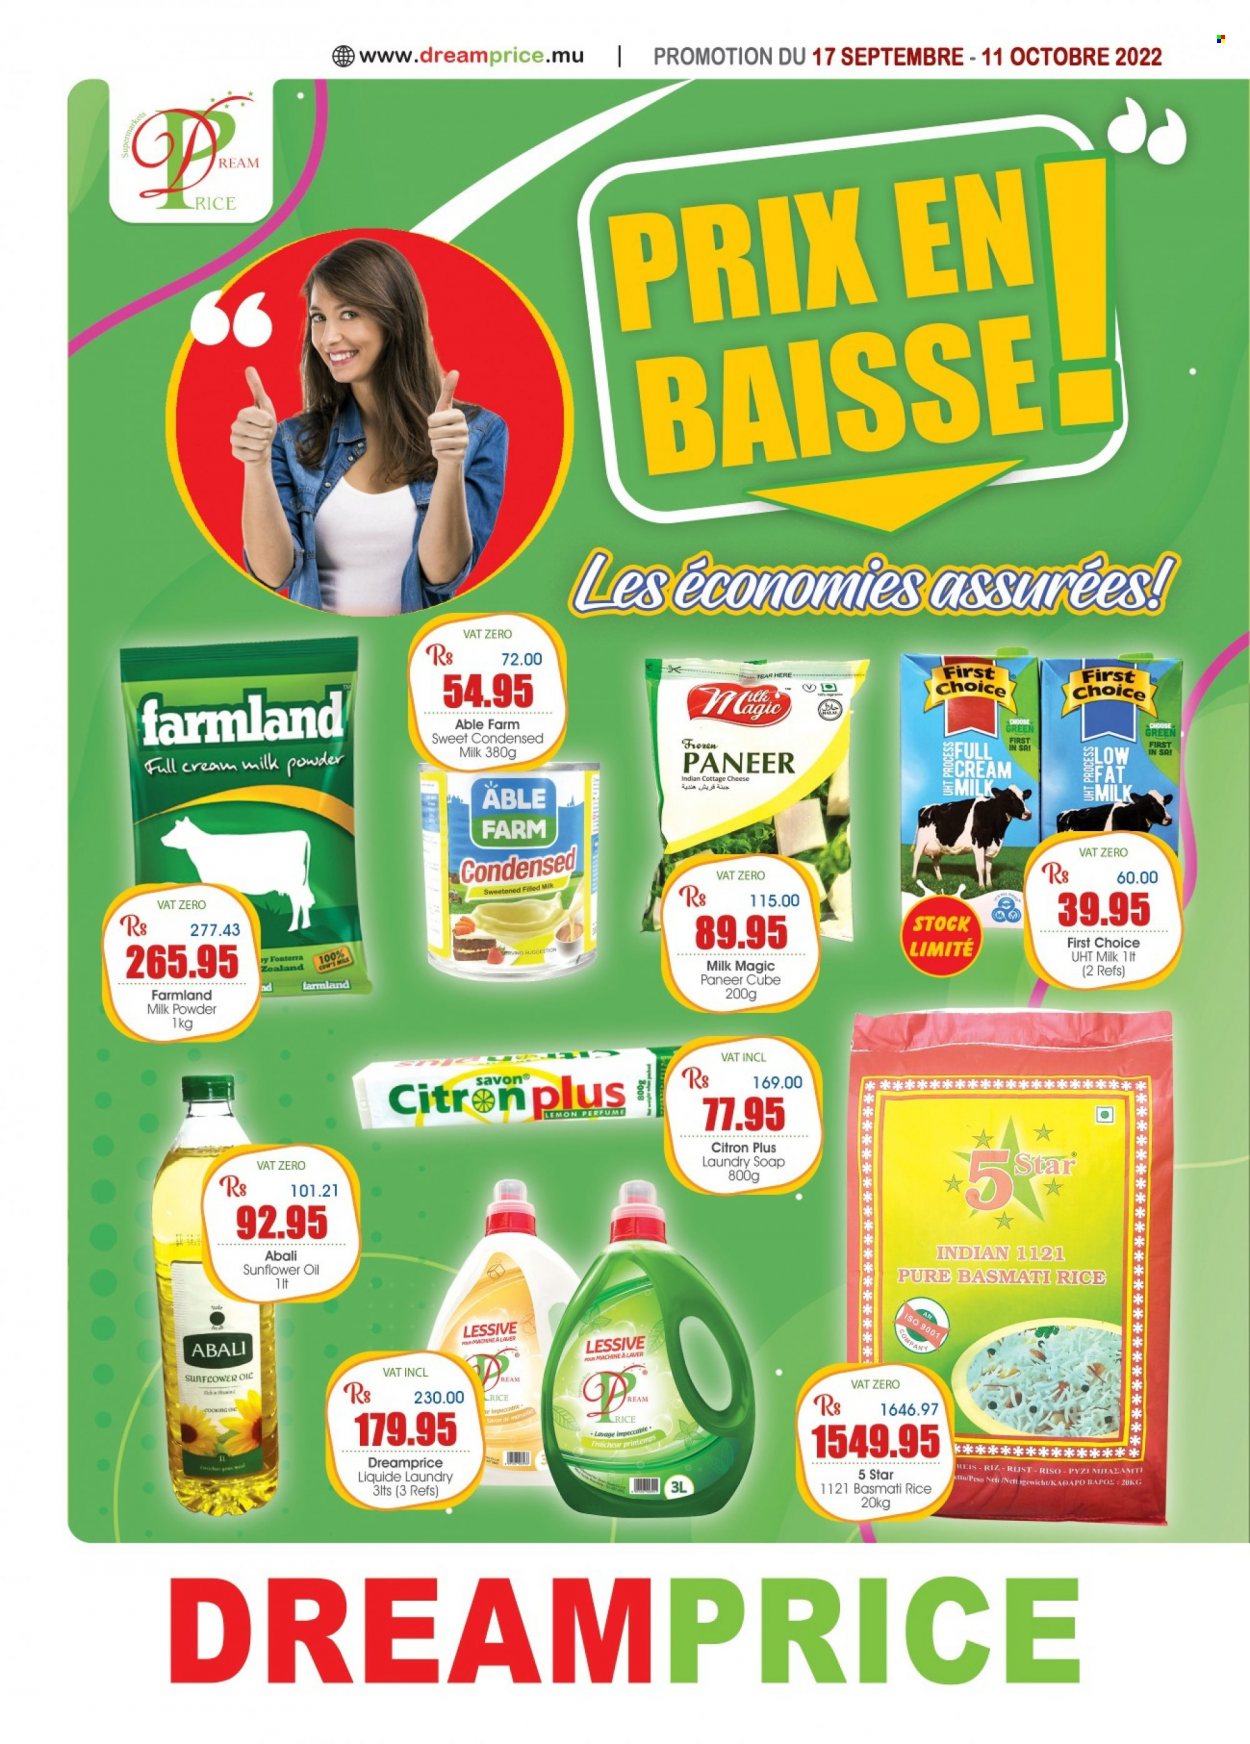 Dreamprice Catalogue - 17.09.2022 - 11.10.2022 - Sales products - cottage cheese, paneer, cheese, condensed milk, milk powder, basmati rice, rice, sunflower oil, oil, laundry soap bar, soap, eau de parfum. Page 1.